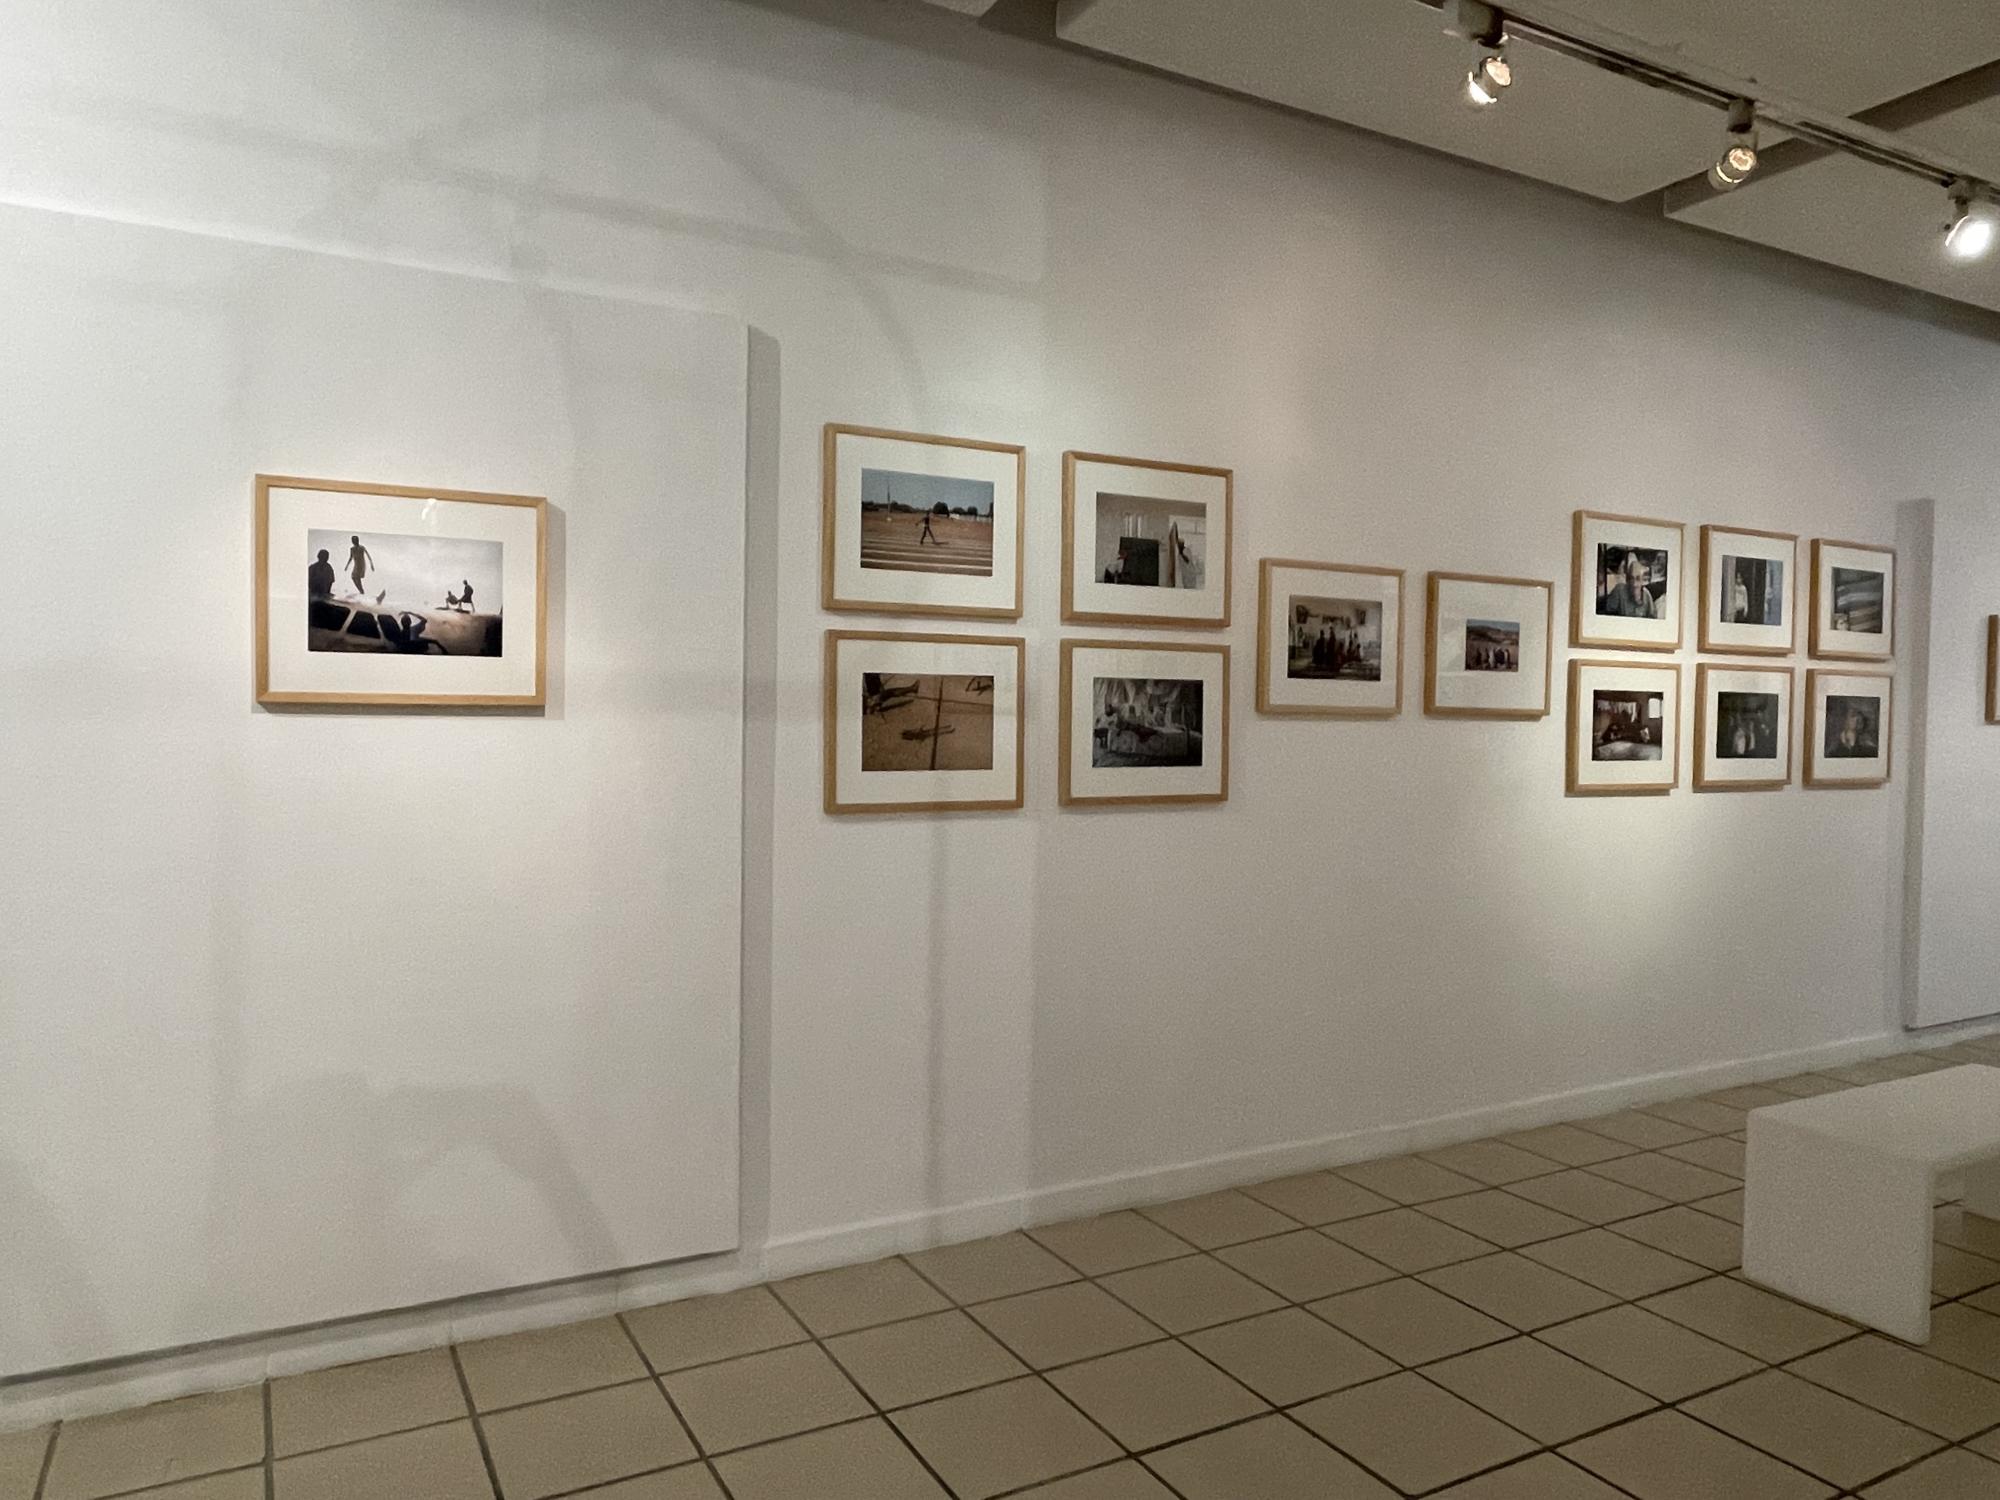 Exhibition at Tangier from May 19 to june 30